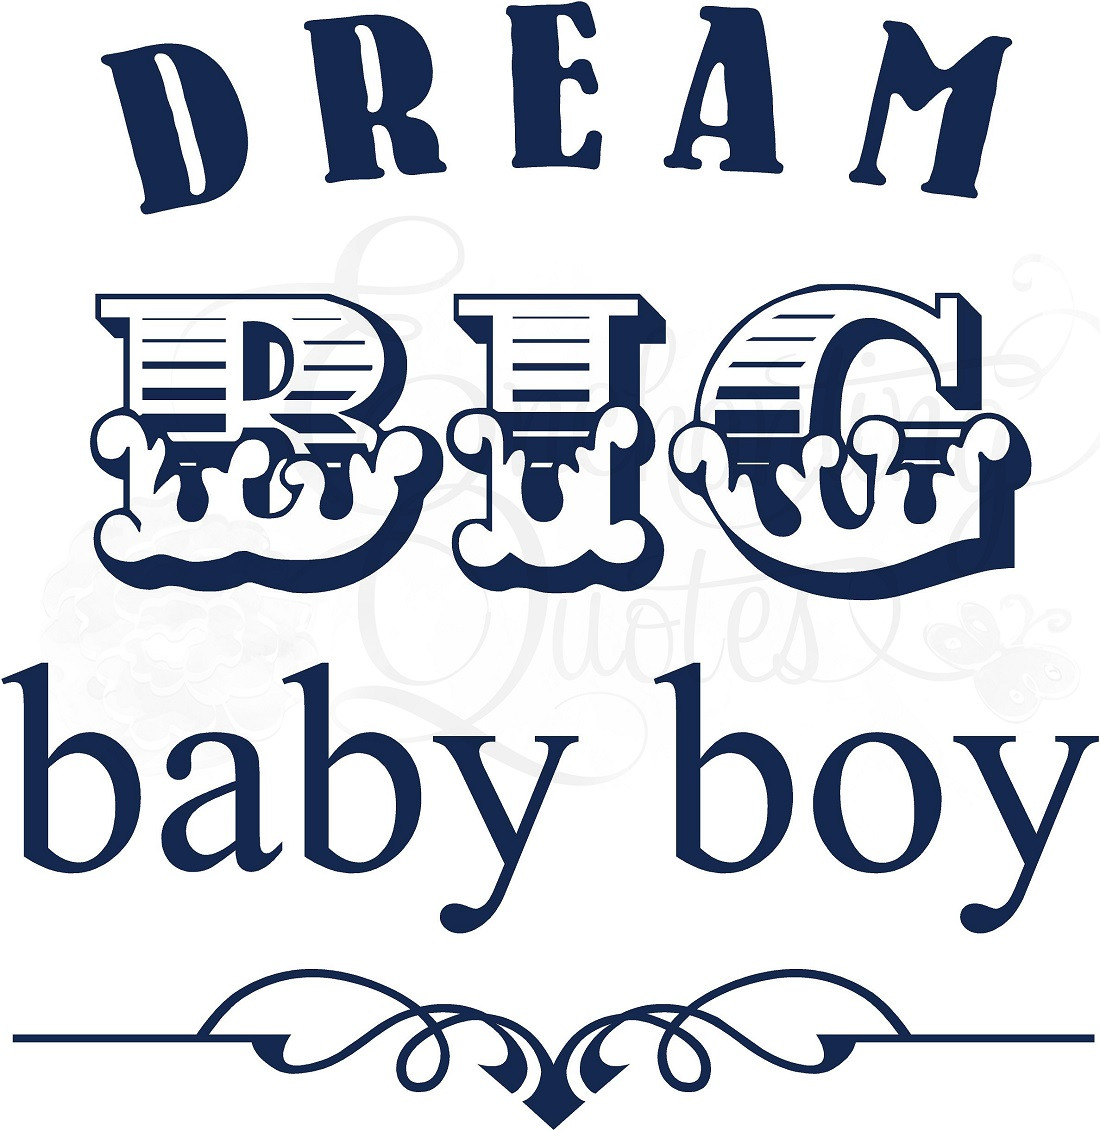 Newborn Baby Boy Quotes And Sayings
 Baby Boy Quotes And Sayings QuotesGram